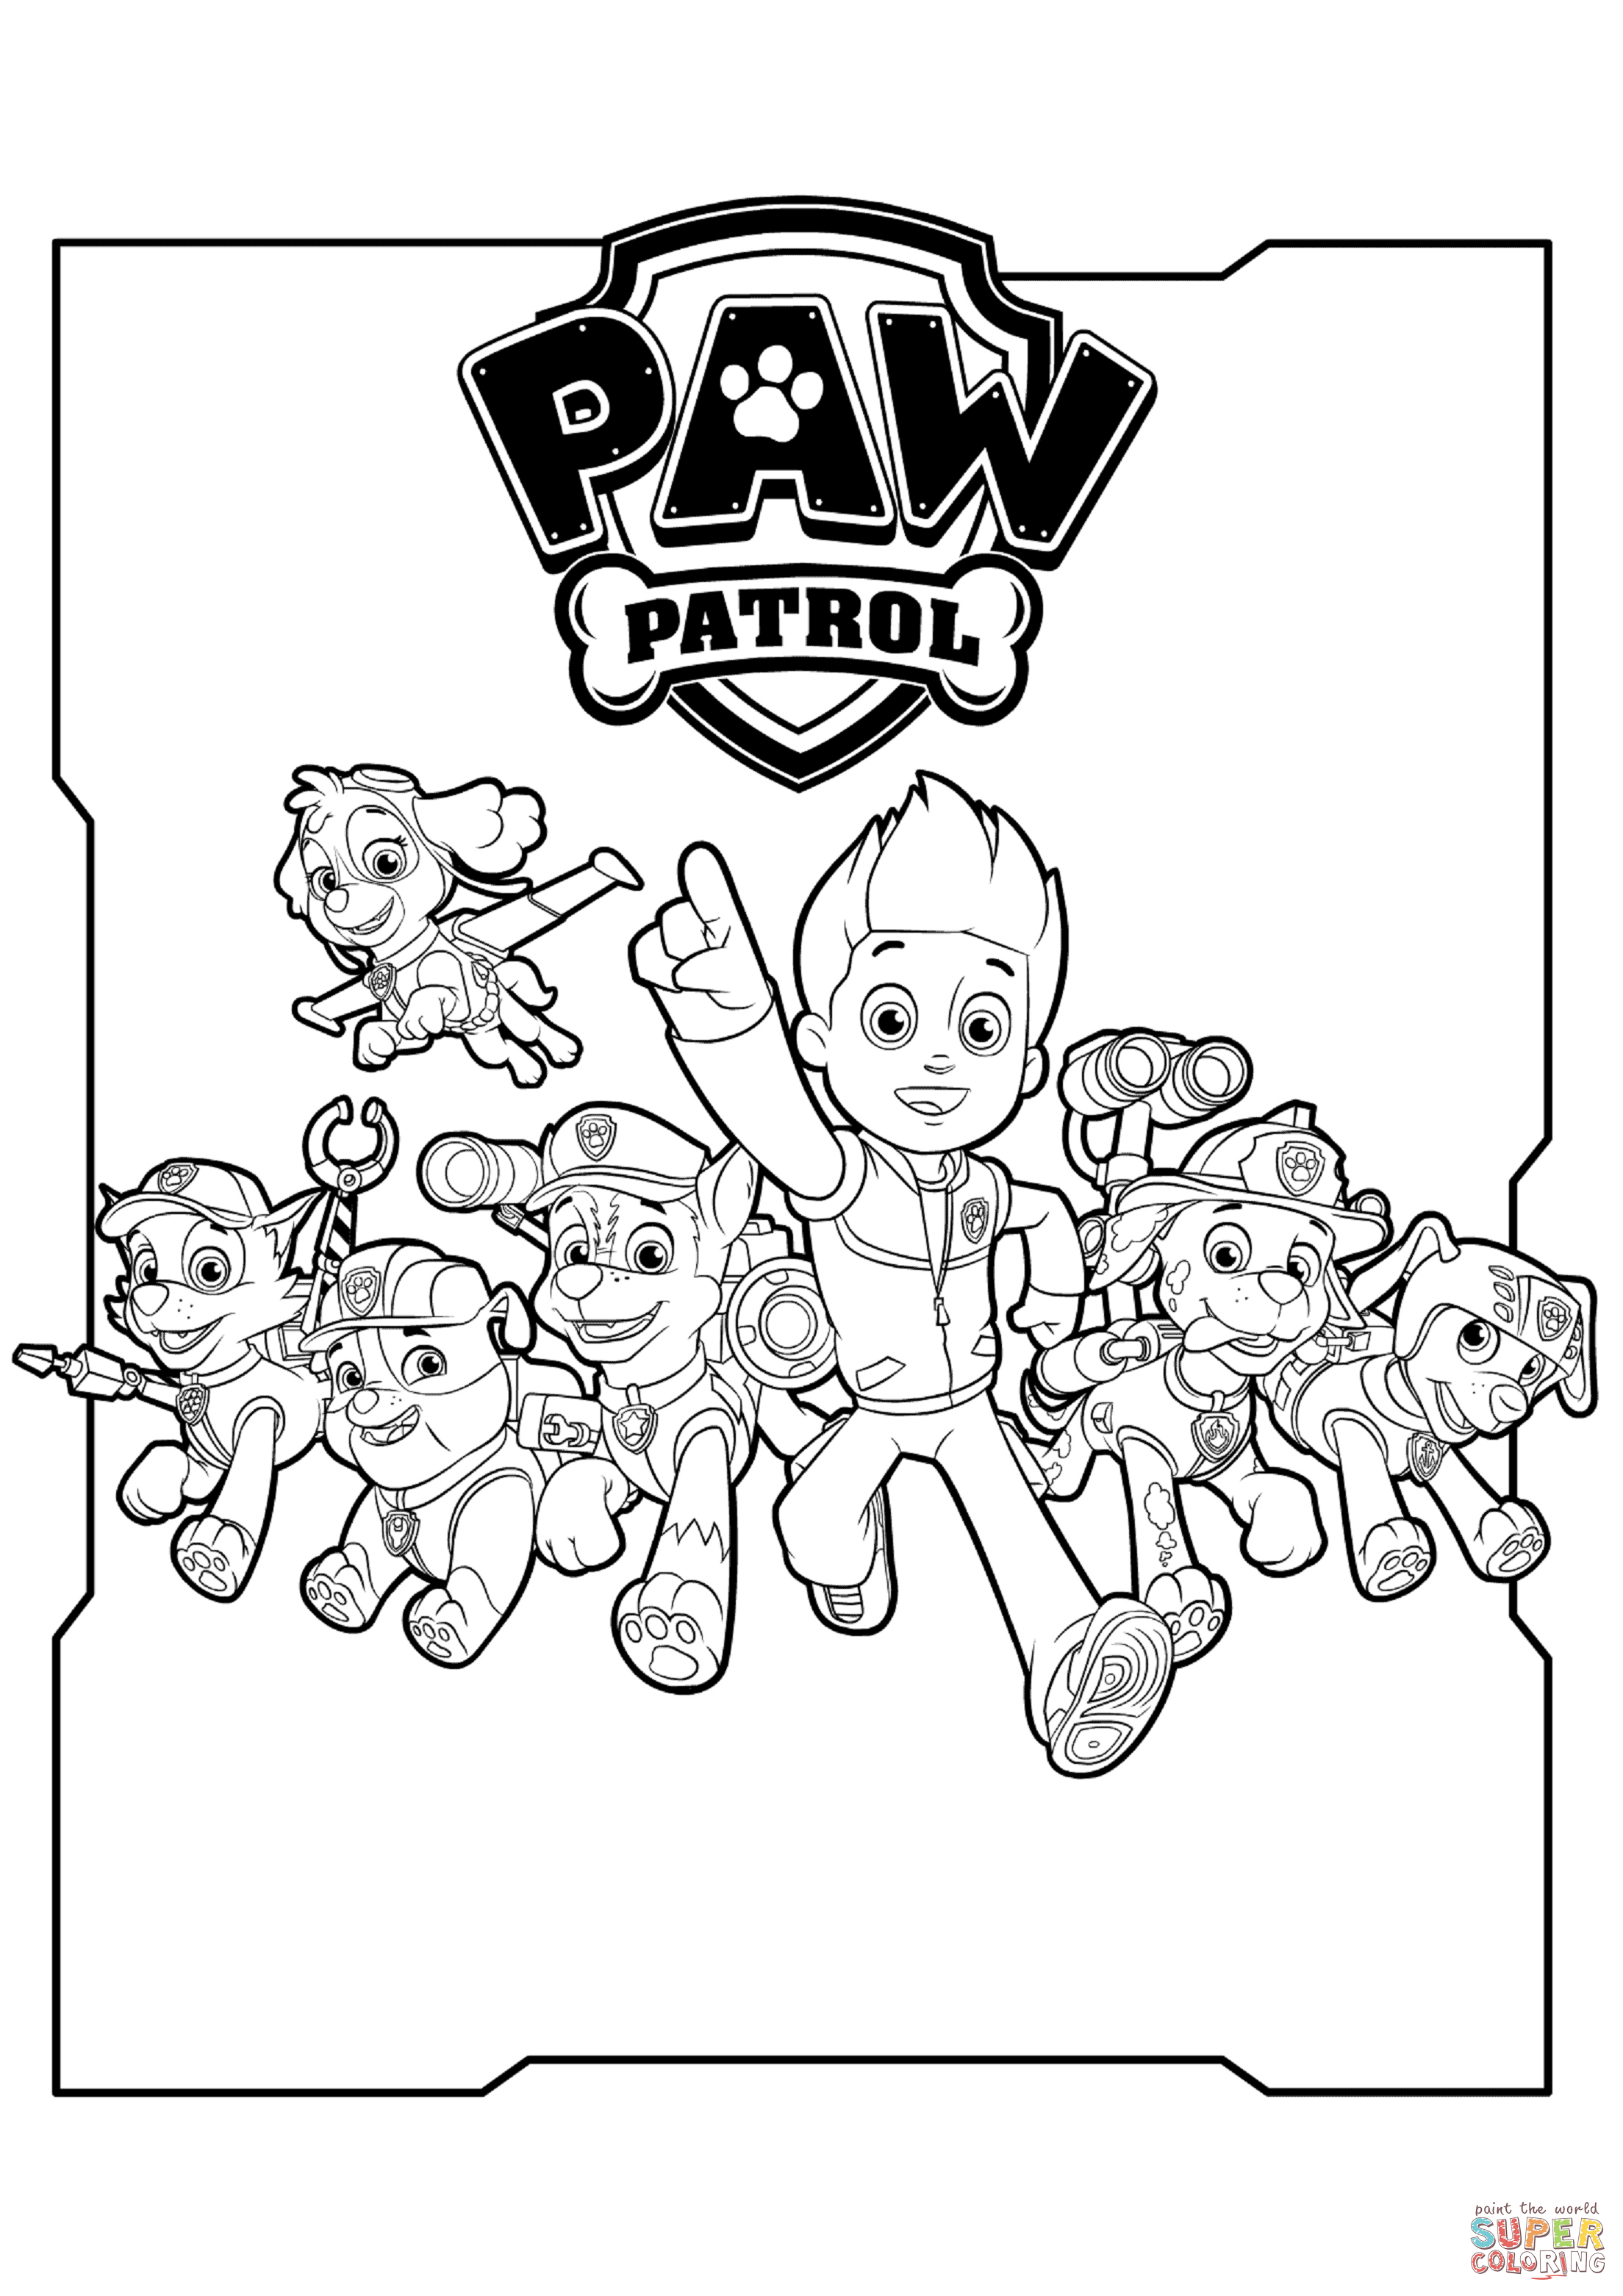 All Paw Patrol Characters coloring page | Free Printable Coloring ...